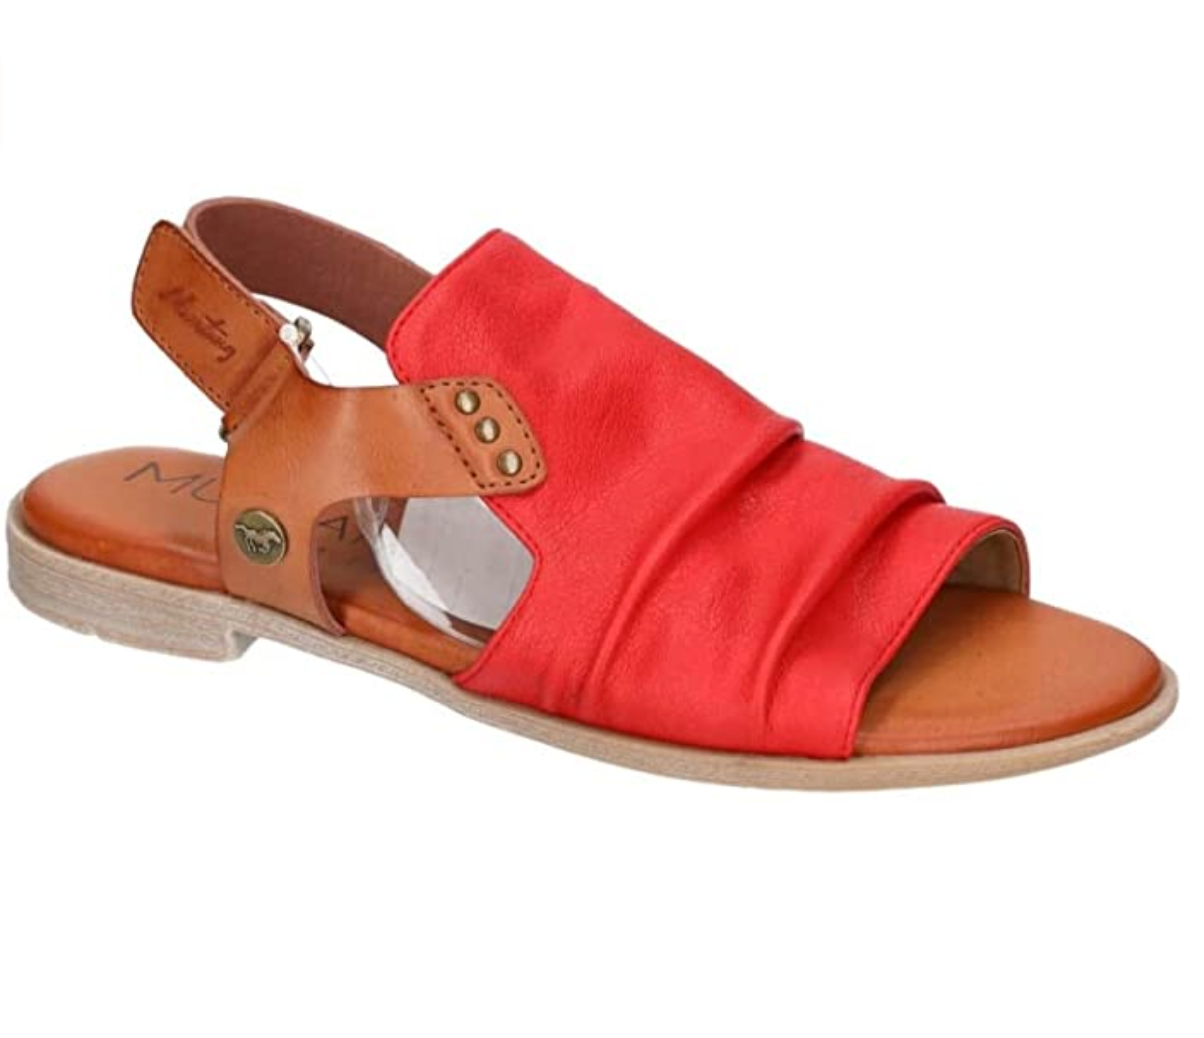 Mustang Womens Fashion Sandals - Red